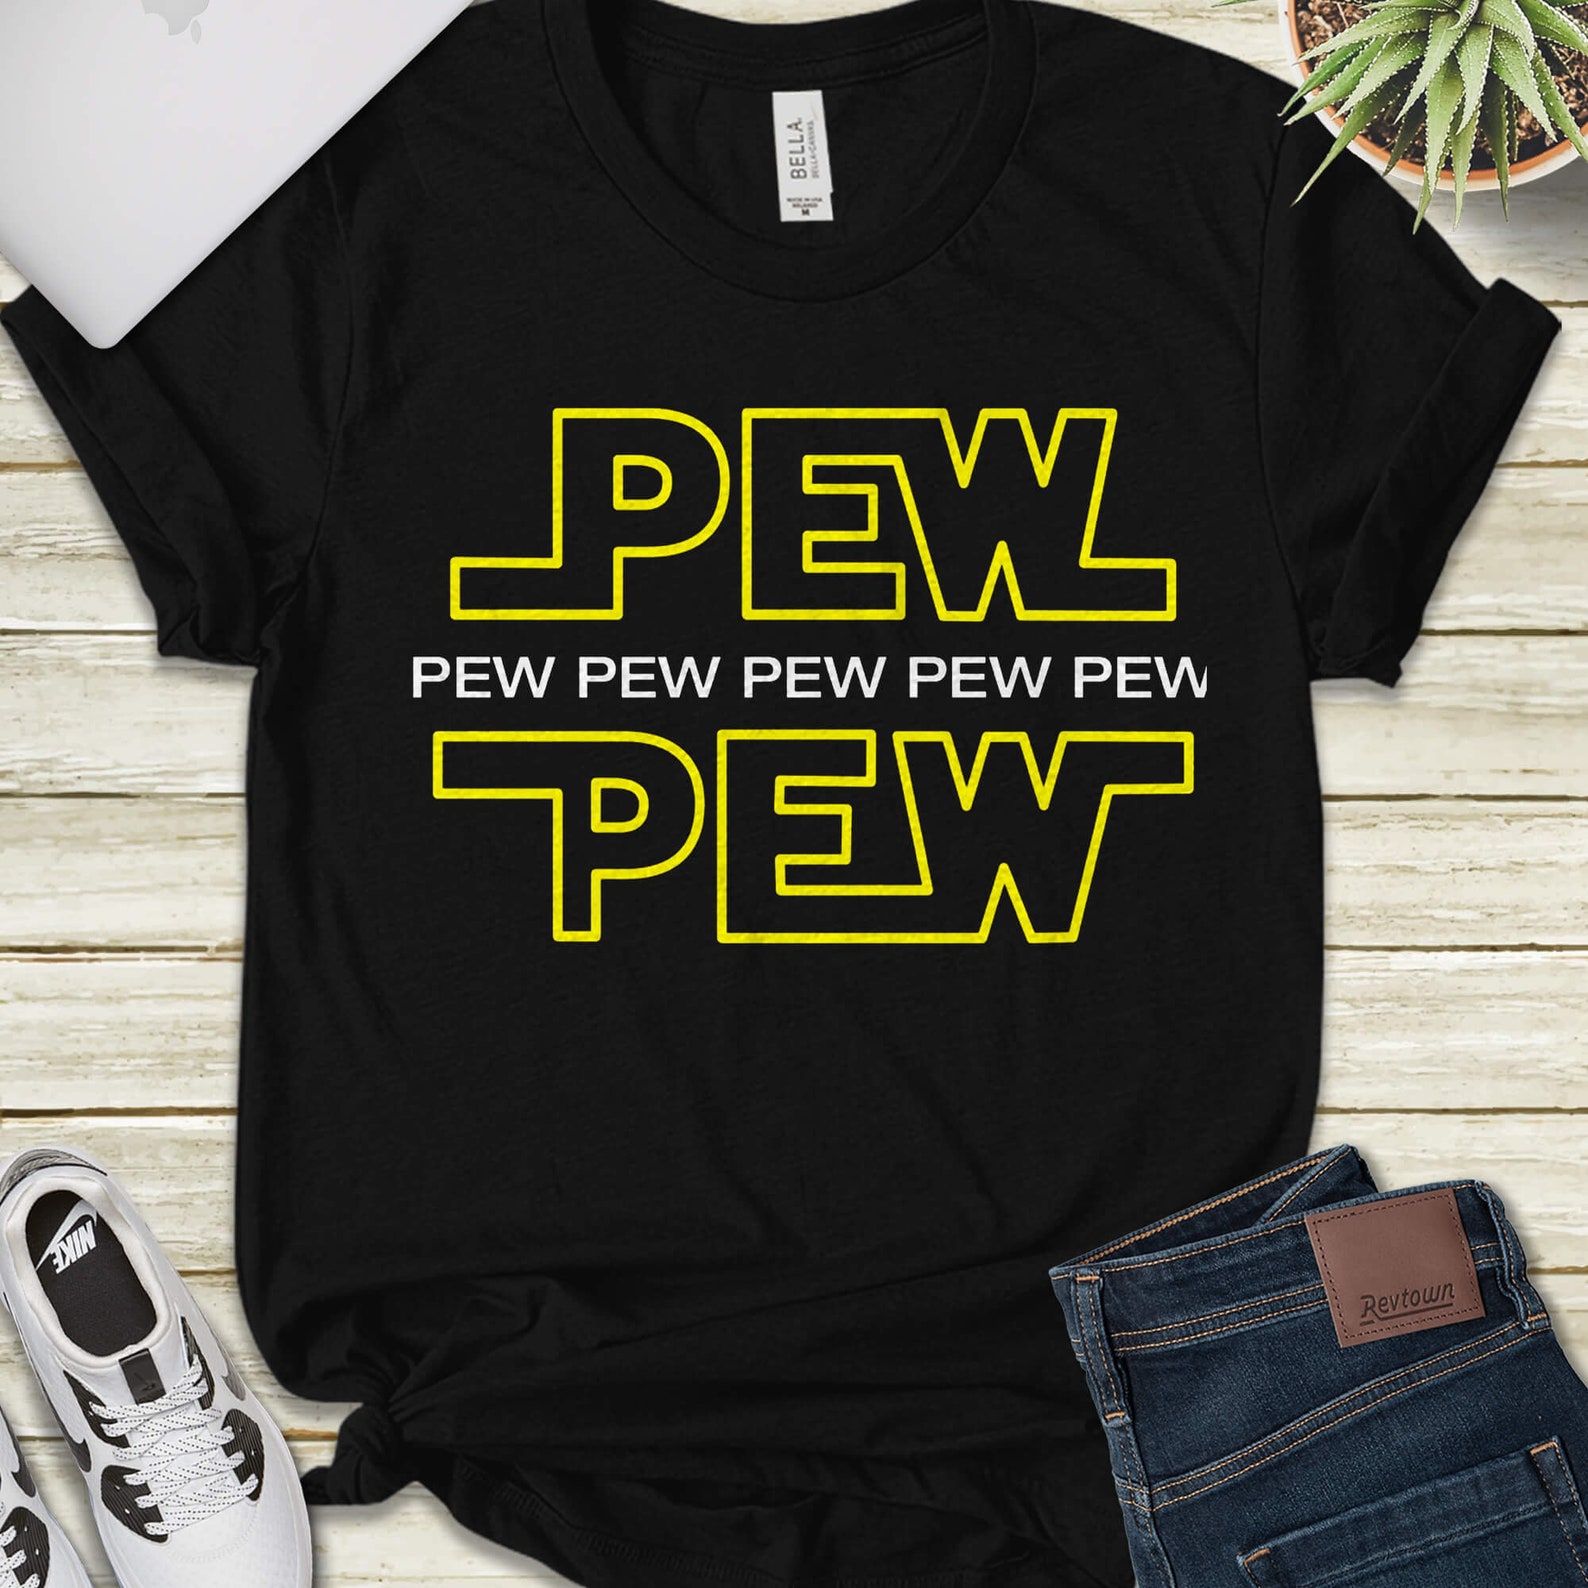 Pew Pew Shirt Pew Pew T T Shirt Pew Pew With Drone Shirt Etsy 